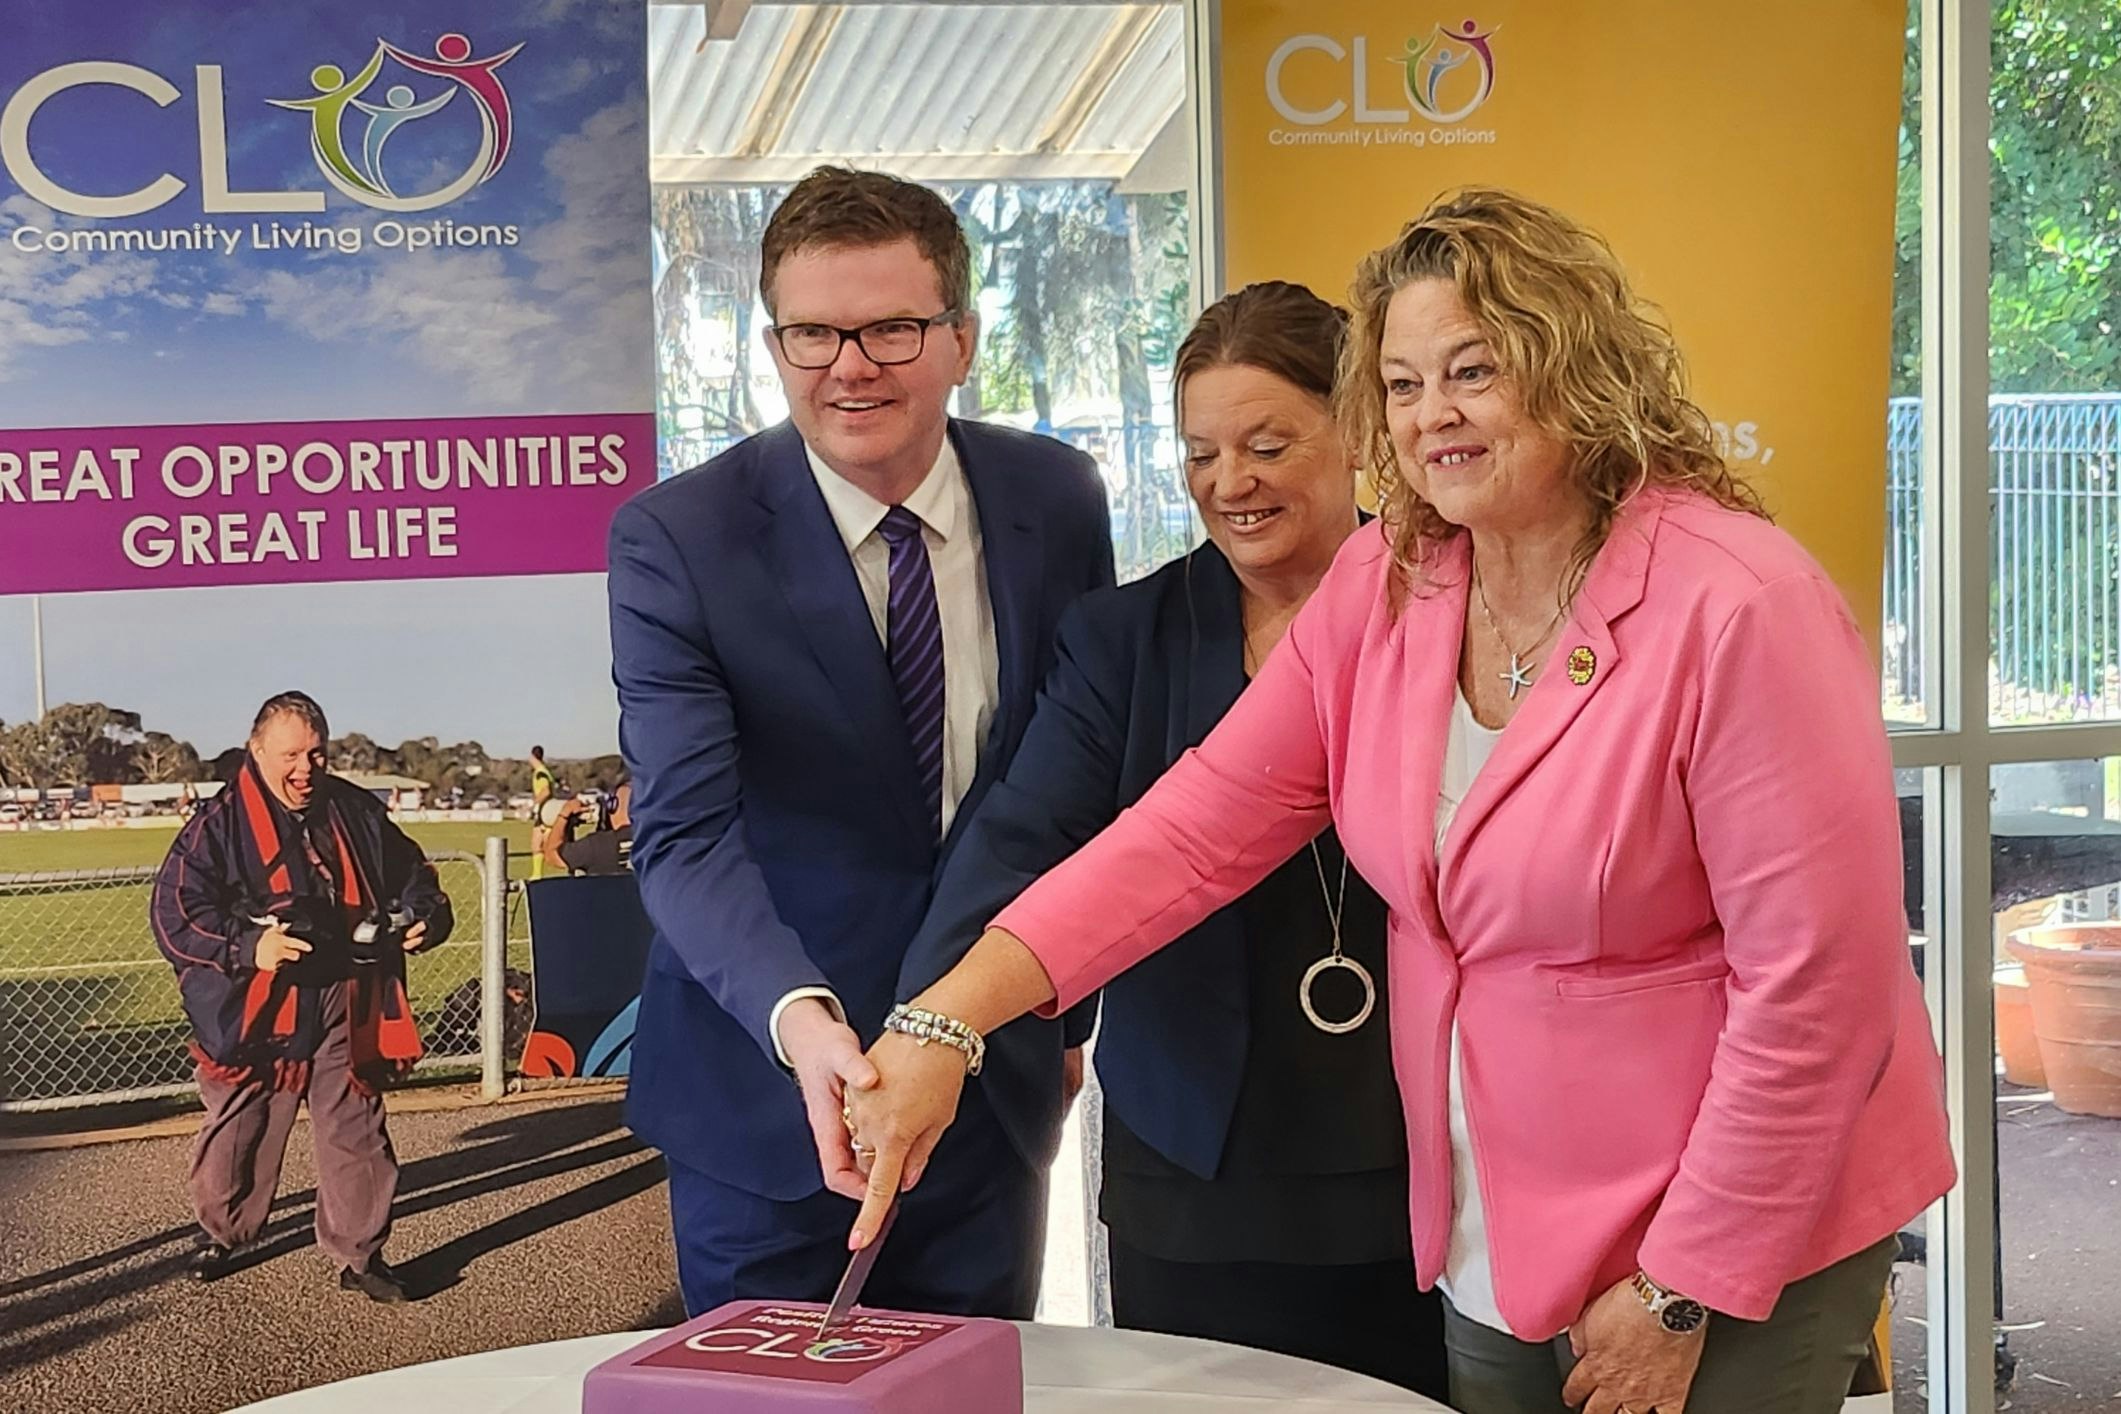 Minister for Health and Well-being Chirs Picton MP [left], Minister for Human Services Nat Cook MP [right] and Community Living Options CEO Mel Kubisa [centre] cut the commemorative cake on Friday morning. [Source: Disability Support Guide]
